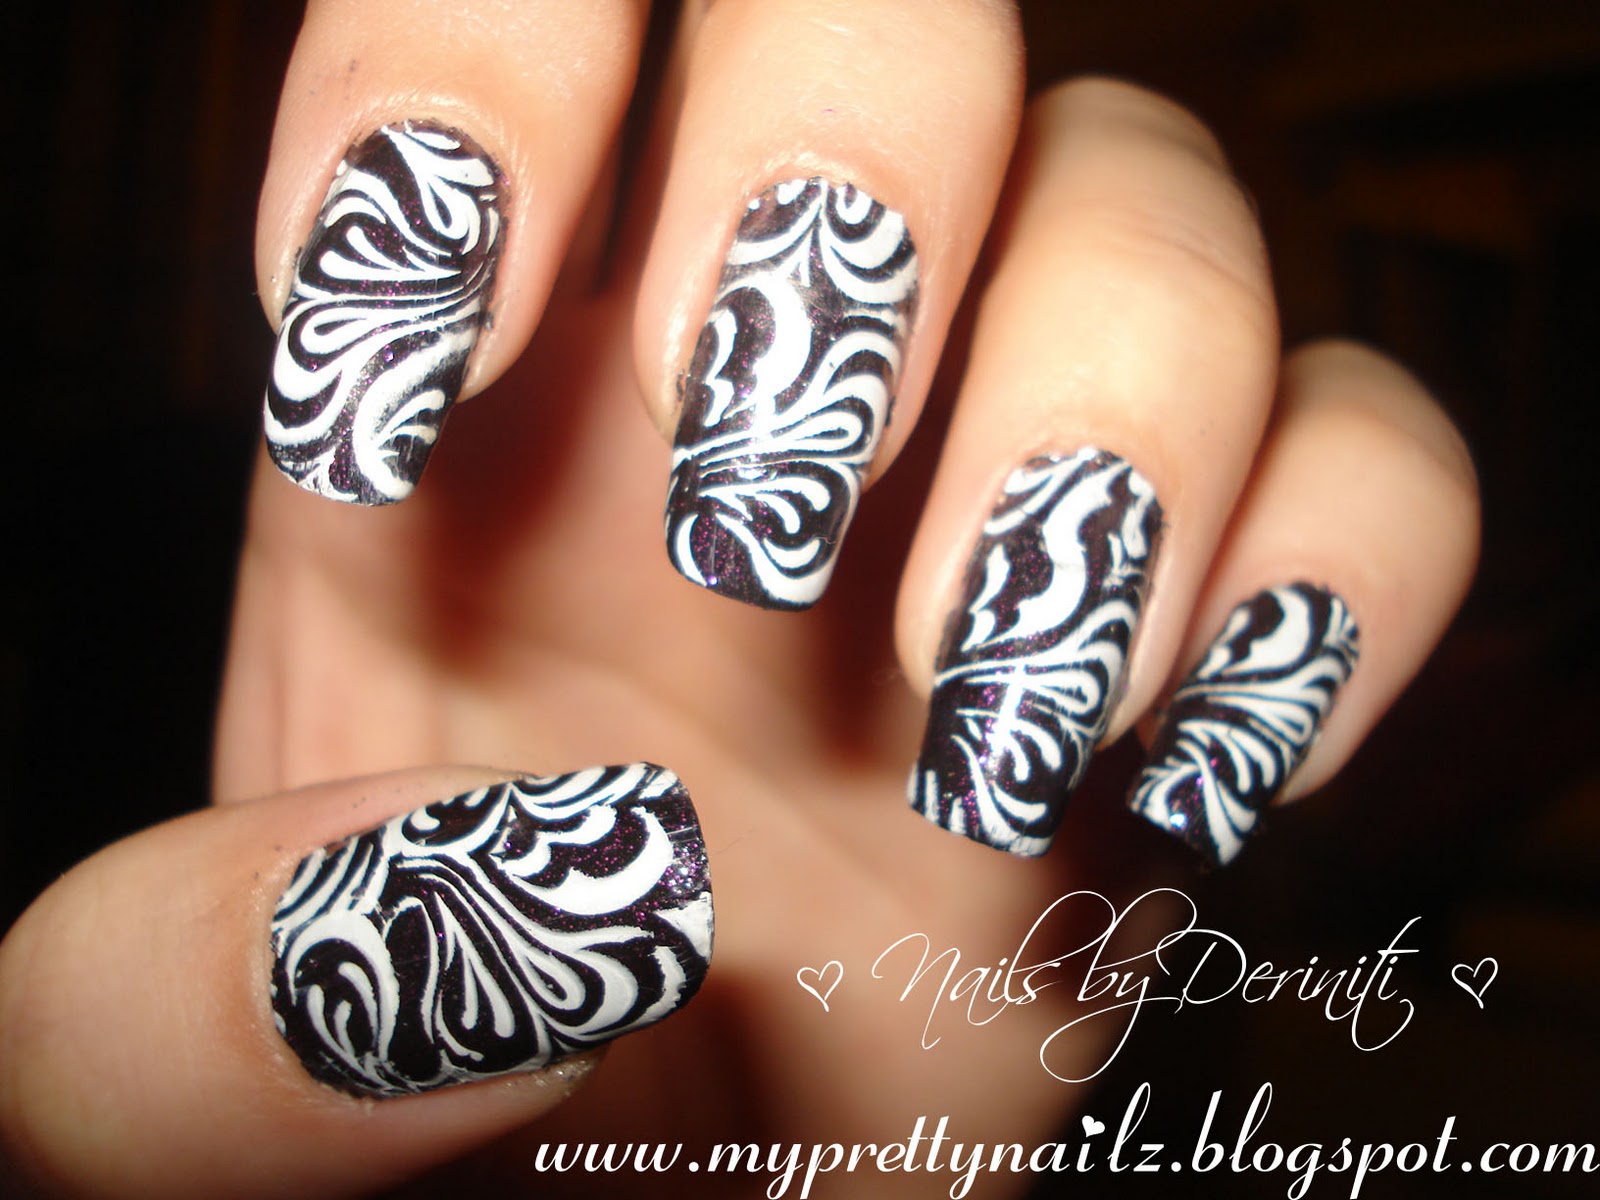 2. Cool Black and White Nail Art - wide 1